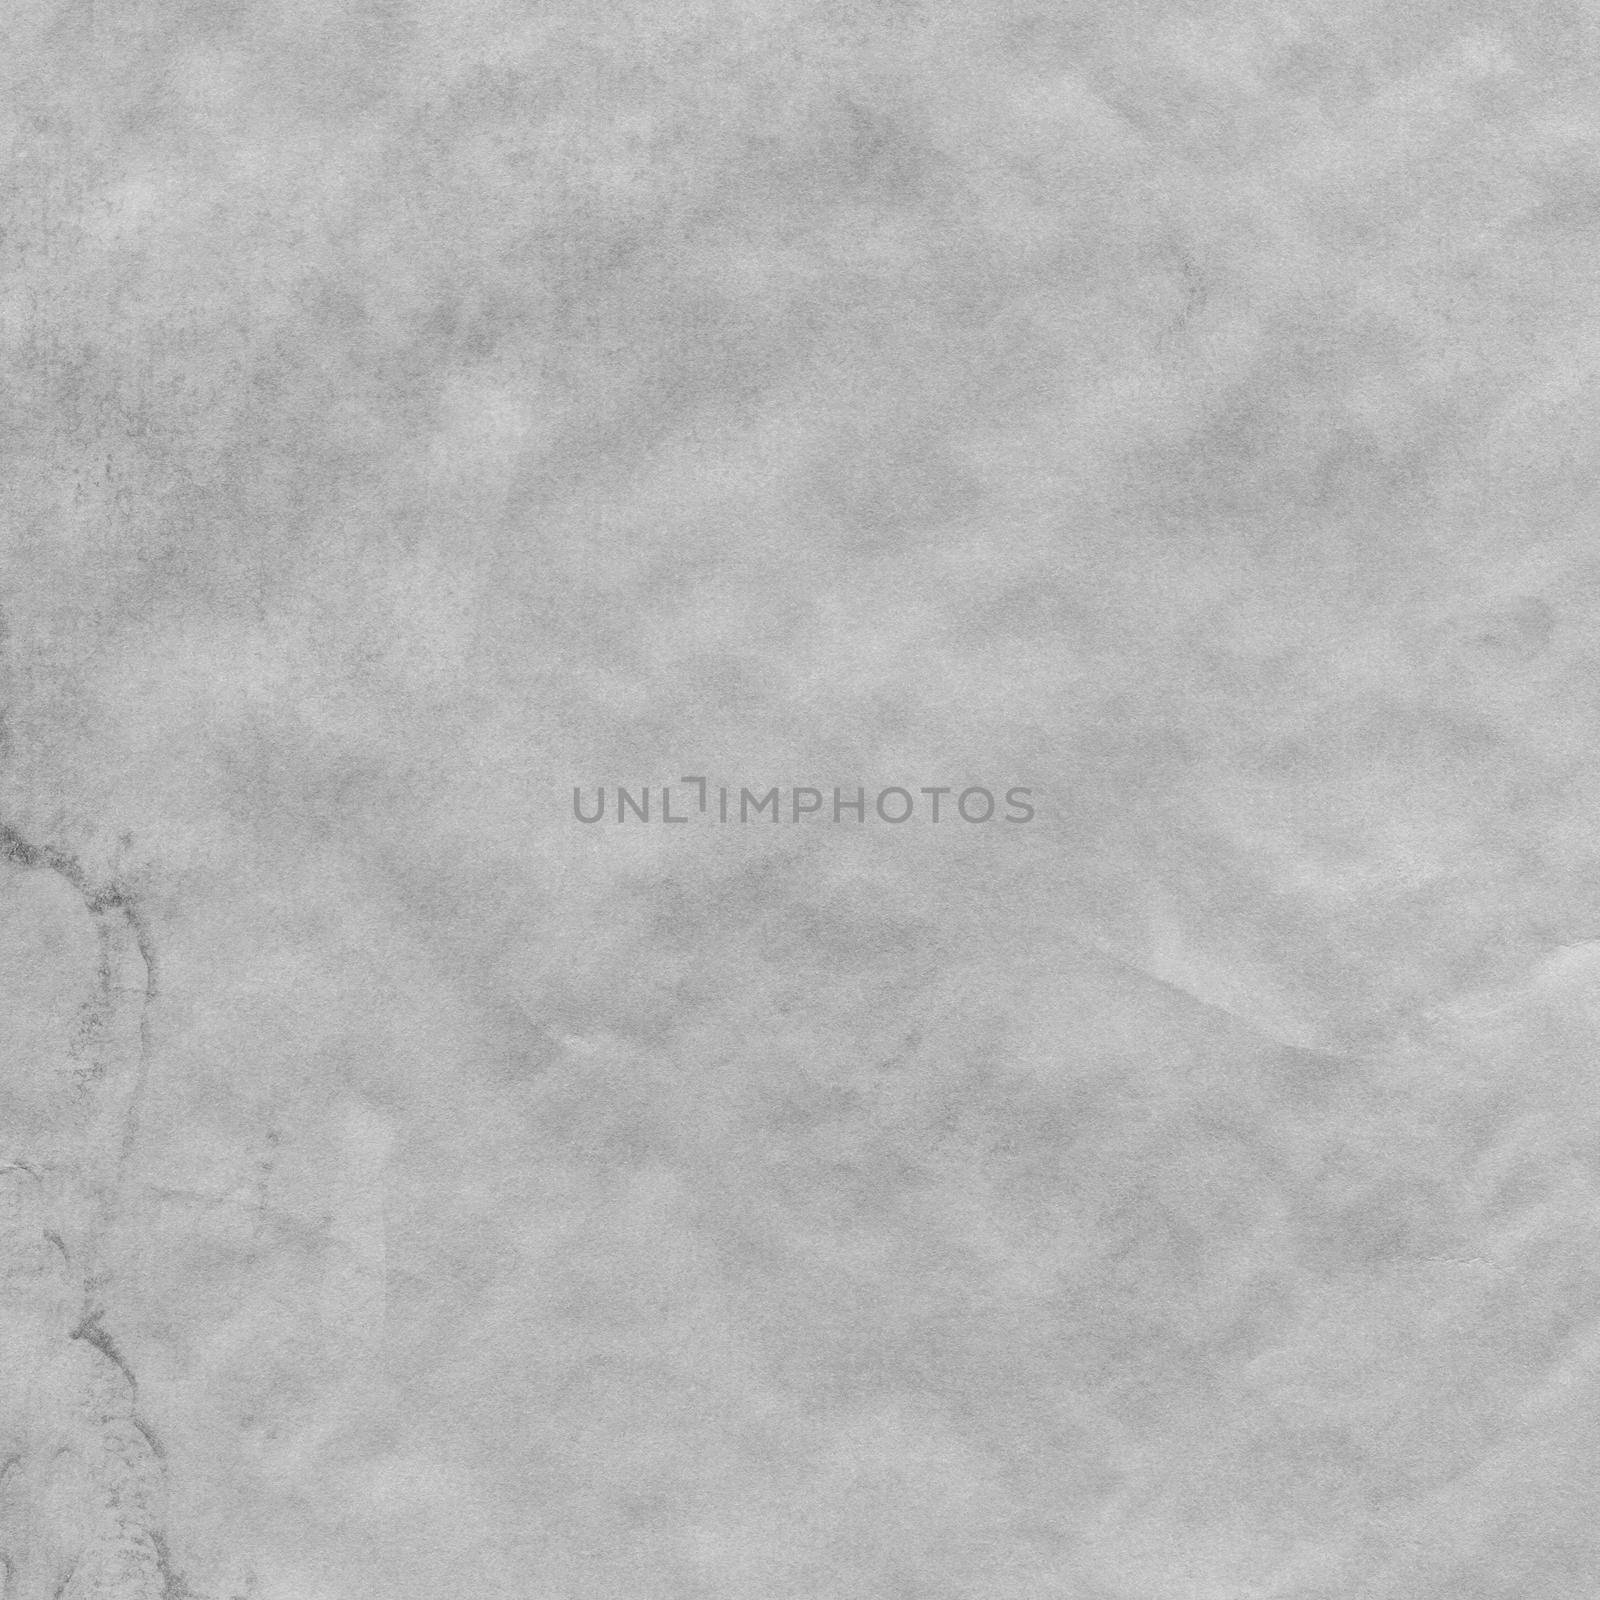 Abstract Gray Watercolor Background. Grey Watercolor Texture. Abstract Watercolor Hand Painted Background. Old Black and White Digital Paper. Vintage textured grunge background.